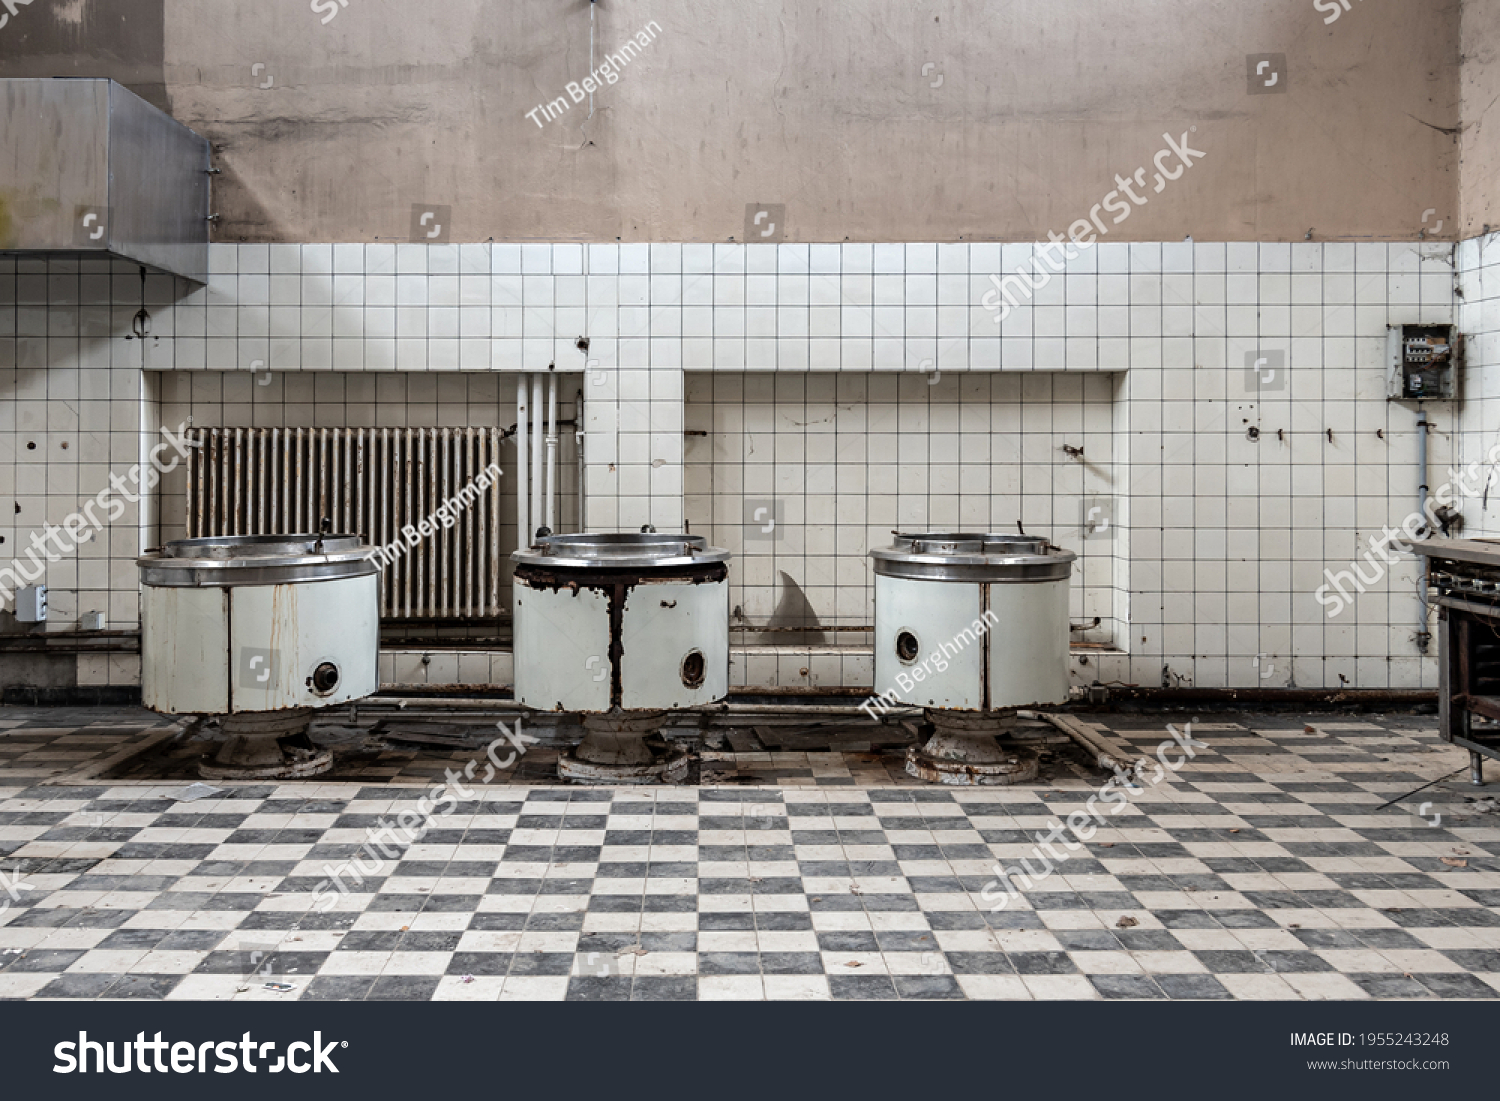 Abandoned large kitchen with 3 large cooking pots and checkerboard pattern tiles #1955243248